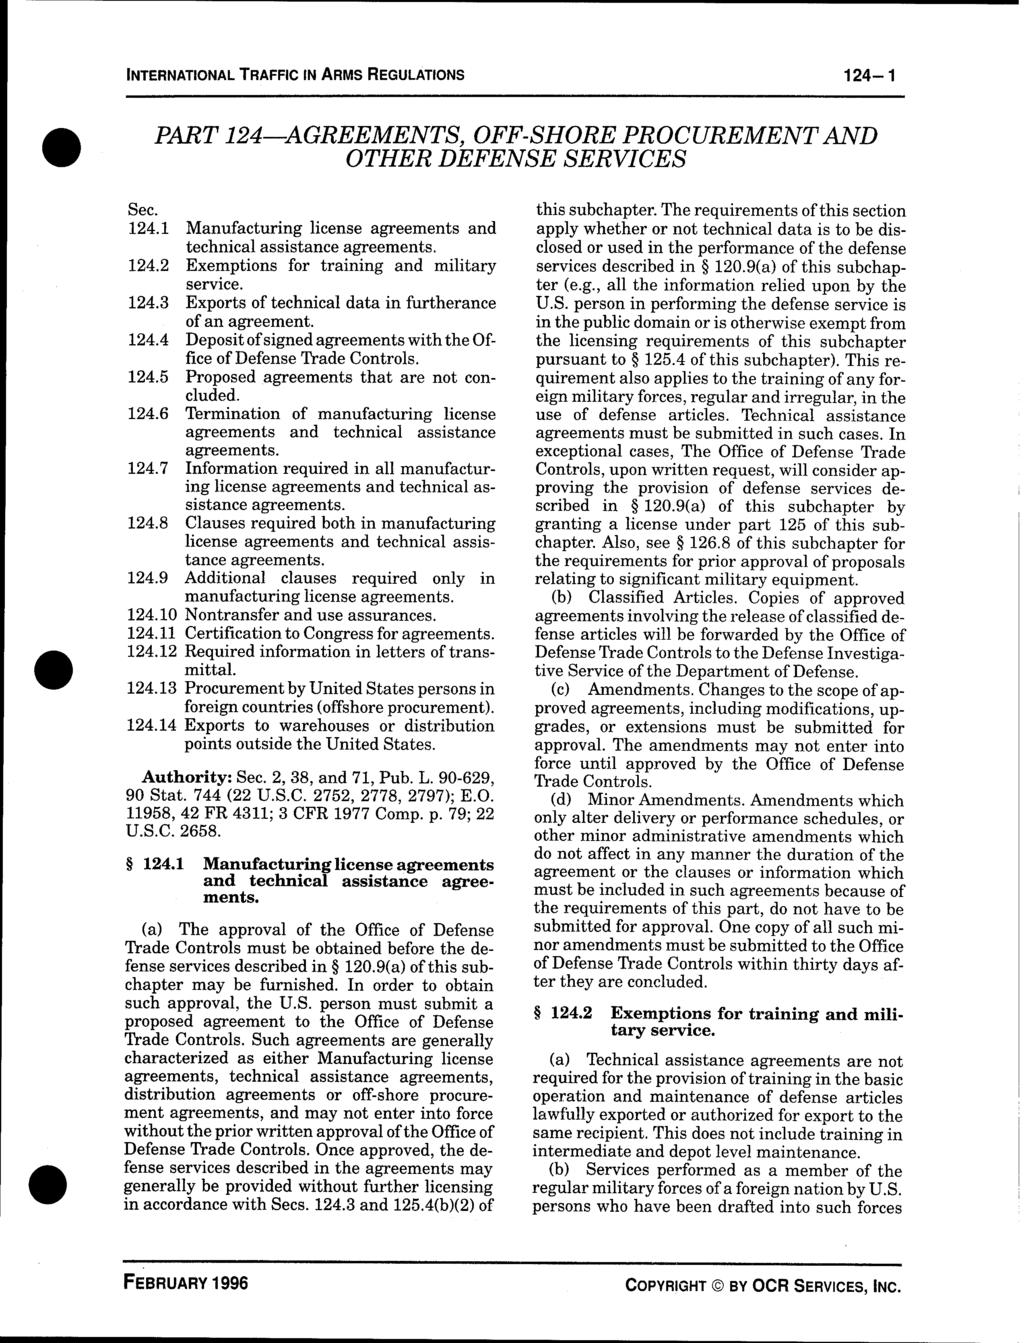 INTERNATIONAL TRAFFIC IN ARMS REGULATIONS 124-1 PART 124 AGREEMENTS, OFF-SHORE PROCUREMENT AND OTHER DEFENSE SERVICES Sec. 124.1 Manufacturing license agreements and technical assistance agreements.